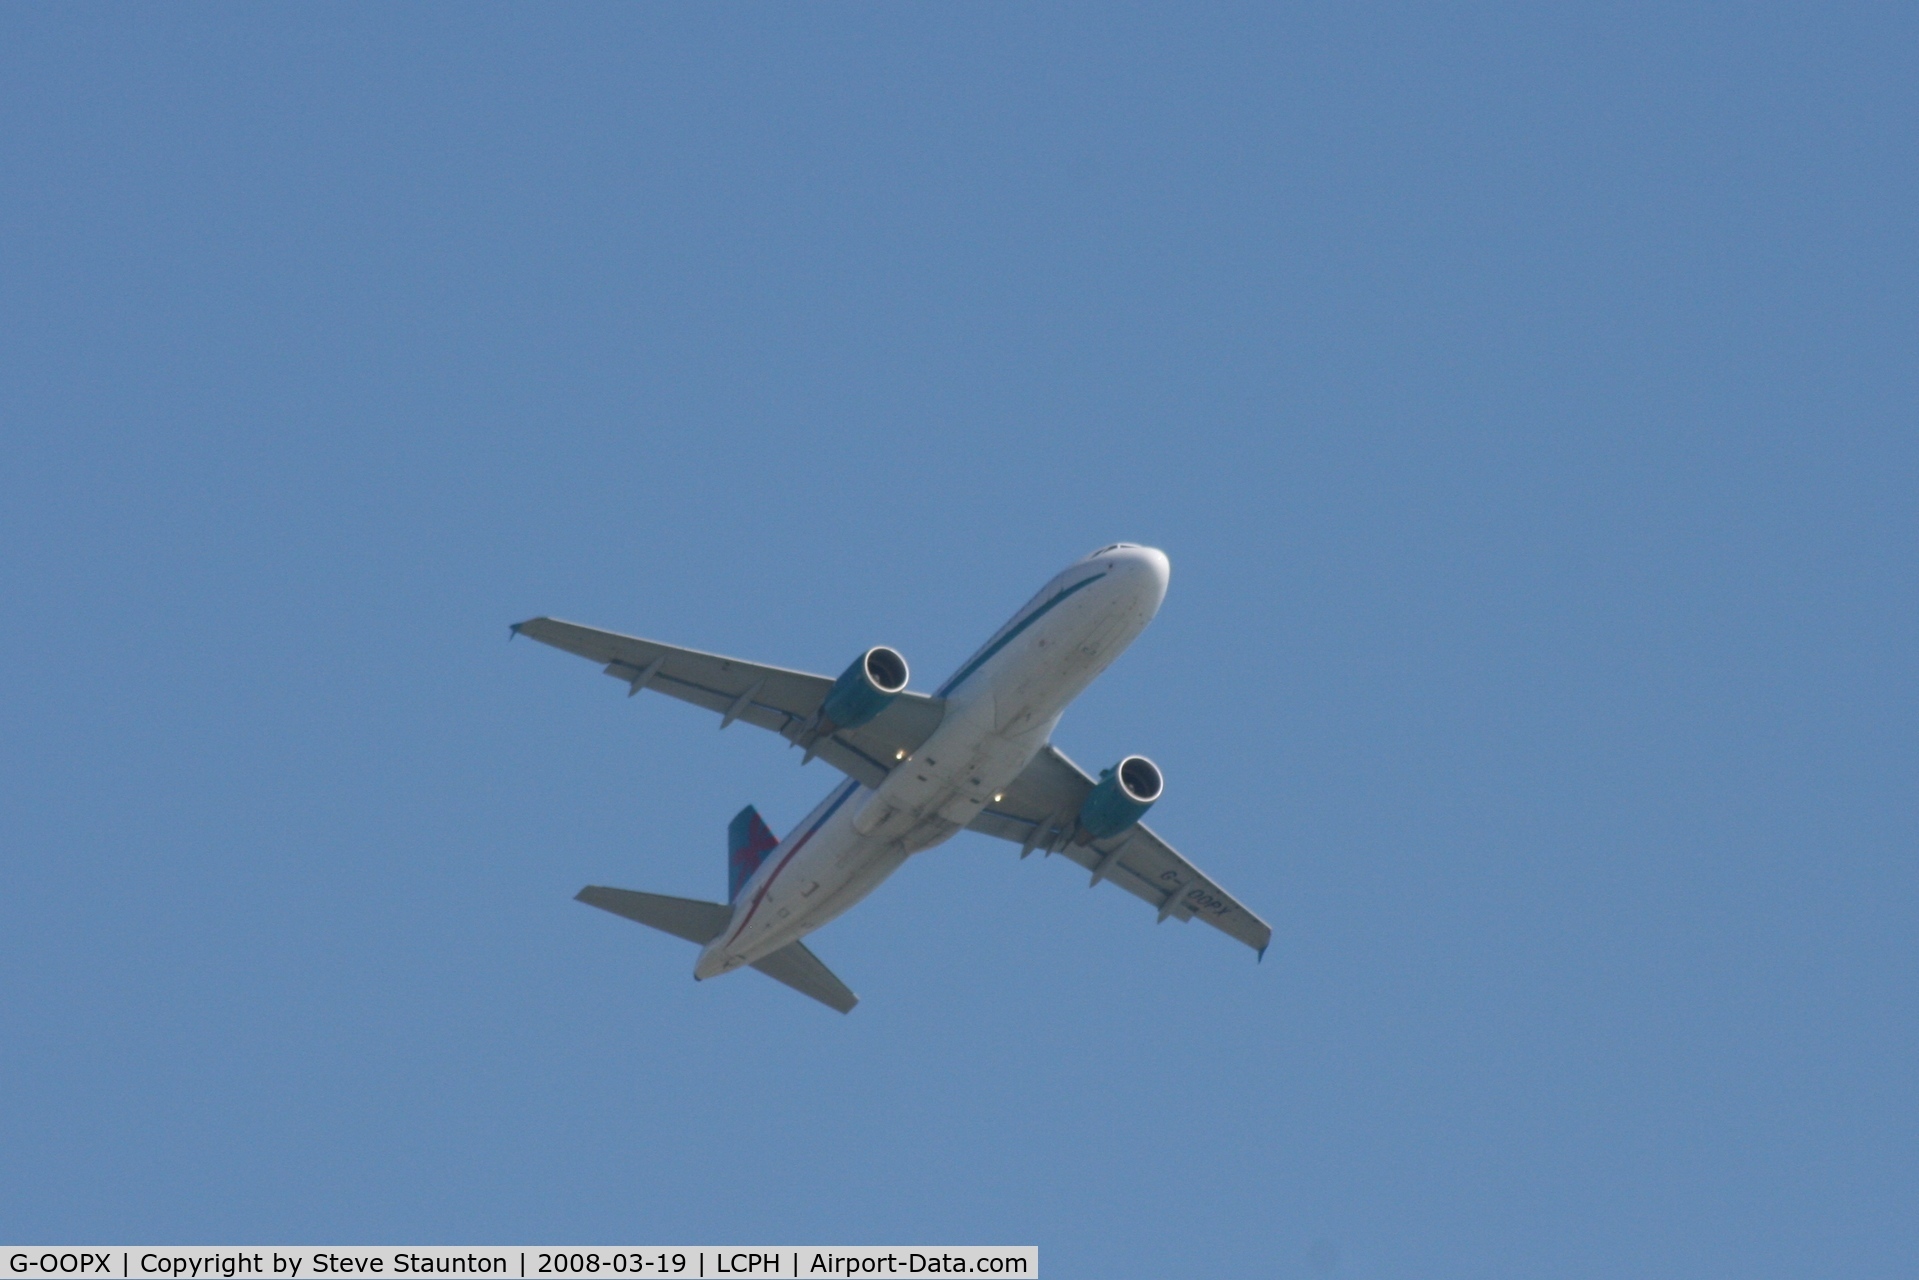 G-OOPX, 2004 Airbus A320-214 C/N 2180, Taken on the approach to Paphos Airport, Cyprus (Climbing out this way today)